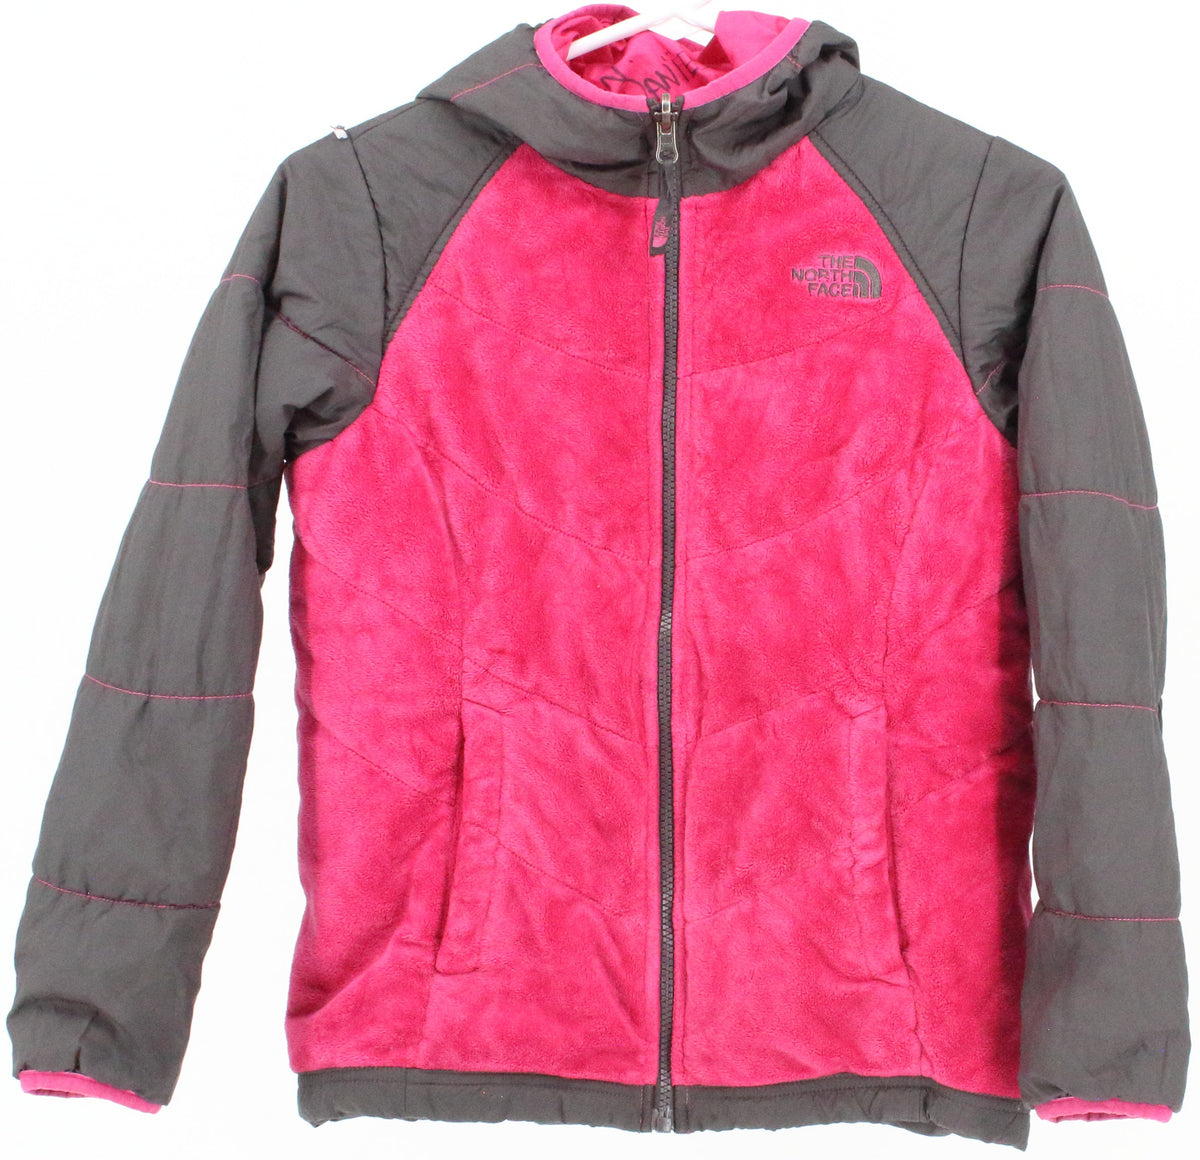 The North Face Pink and Charcoal Reversible Girl's Jacket